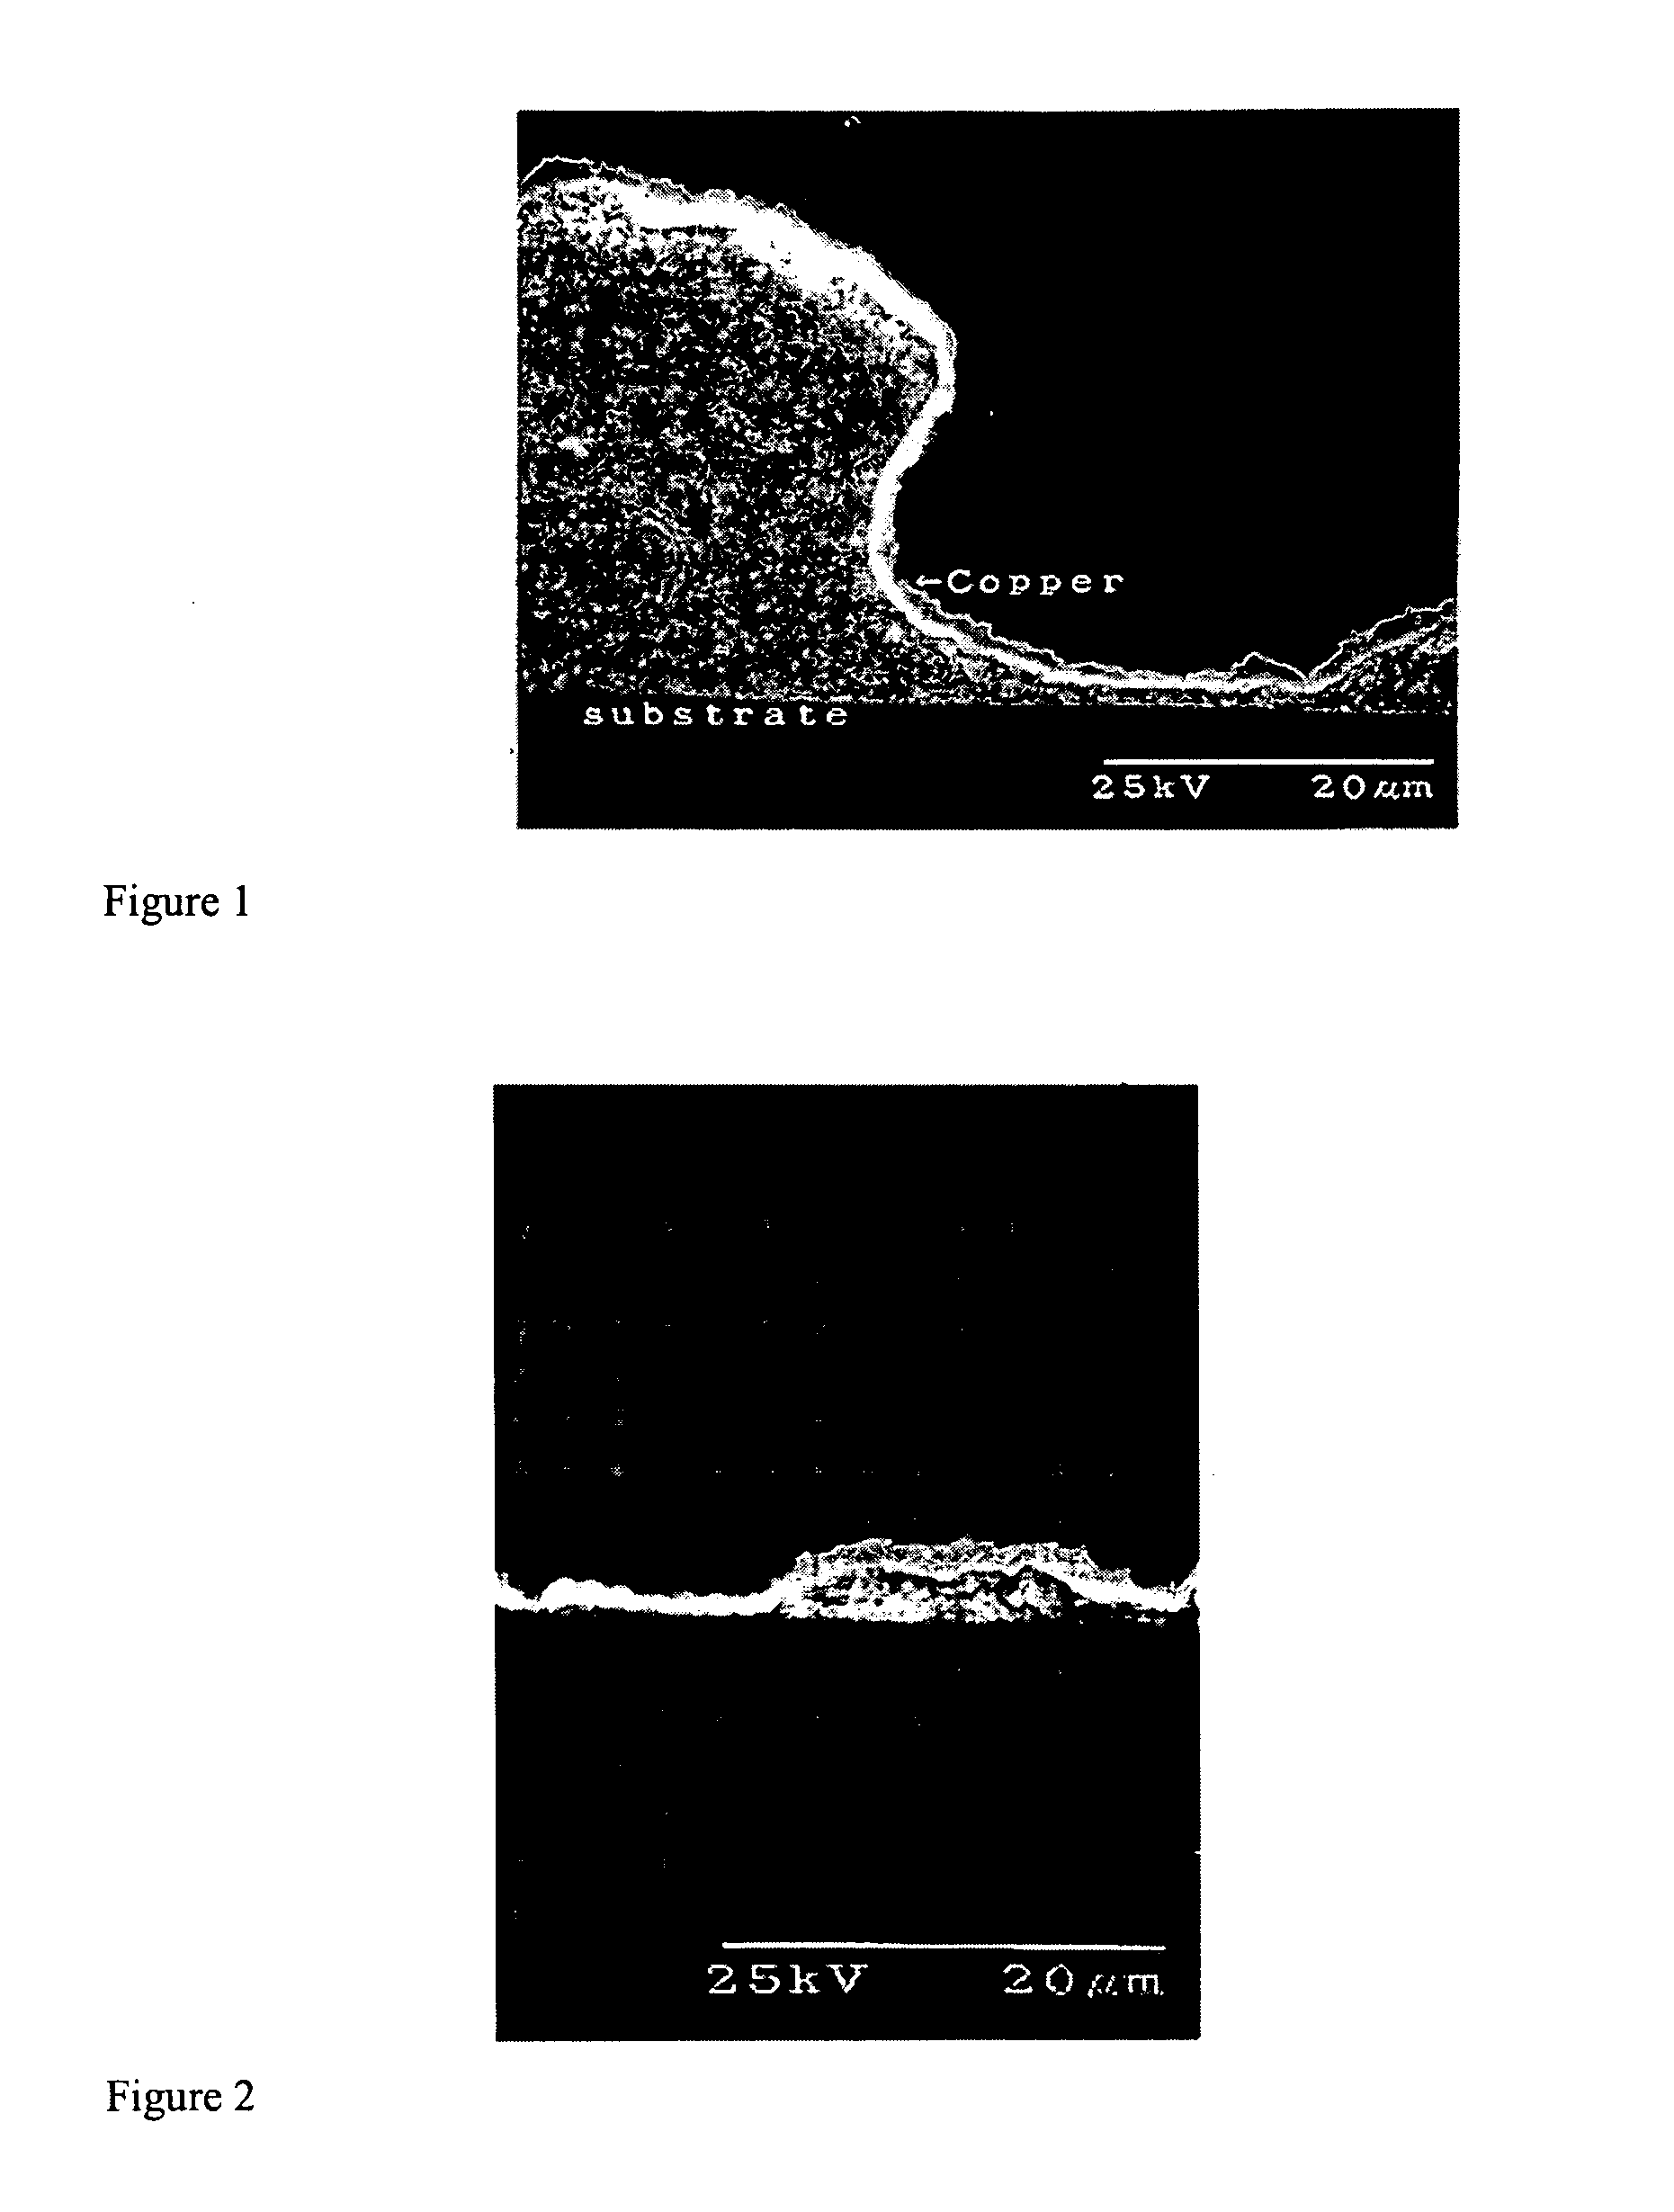 Catalyst composition and deposition method